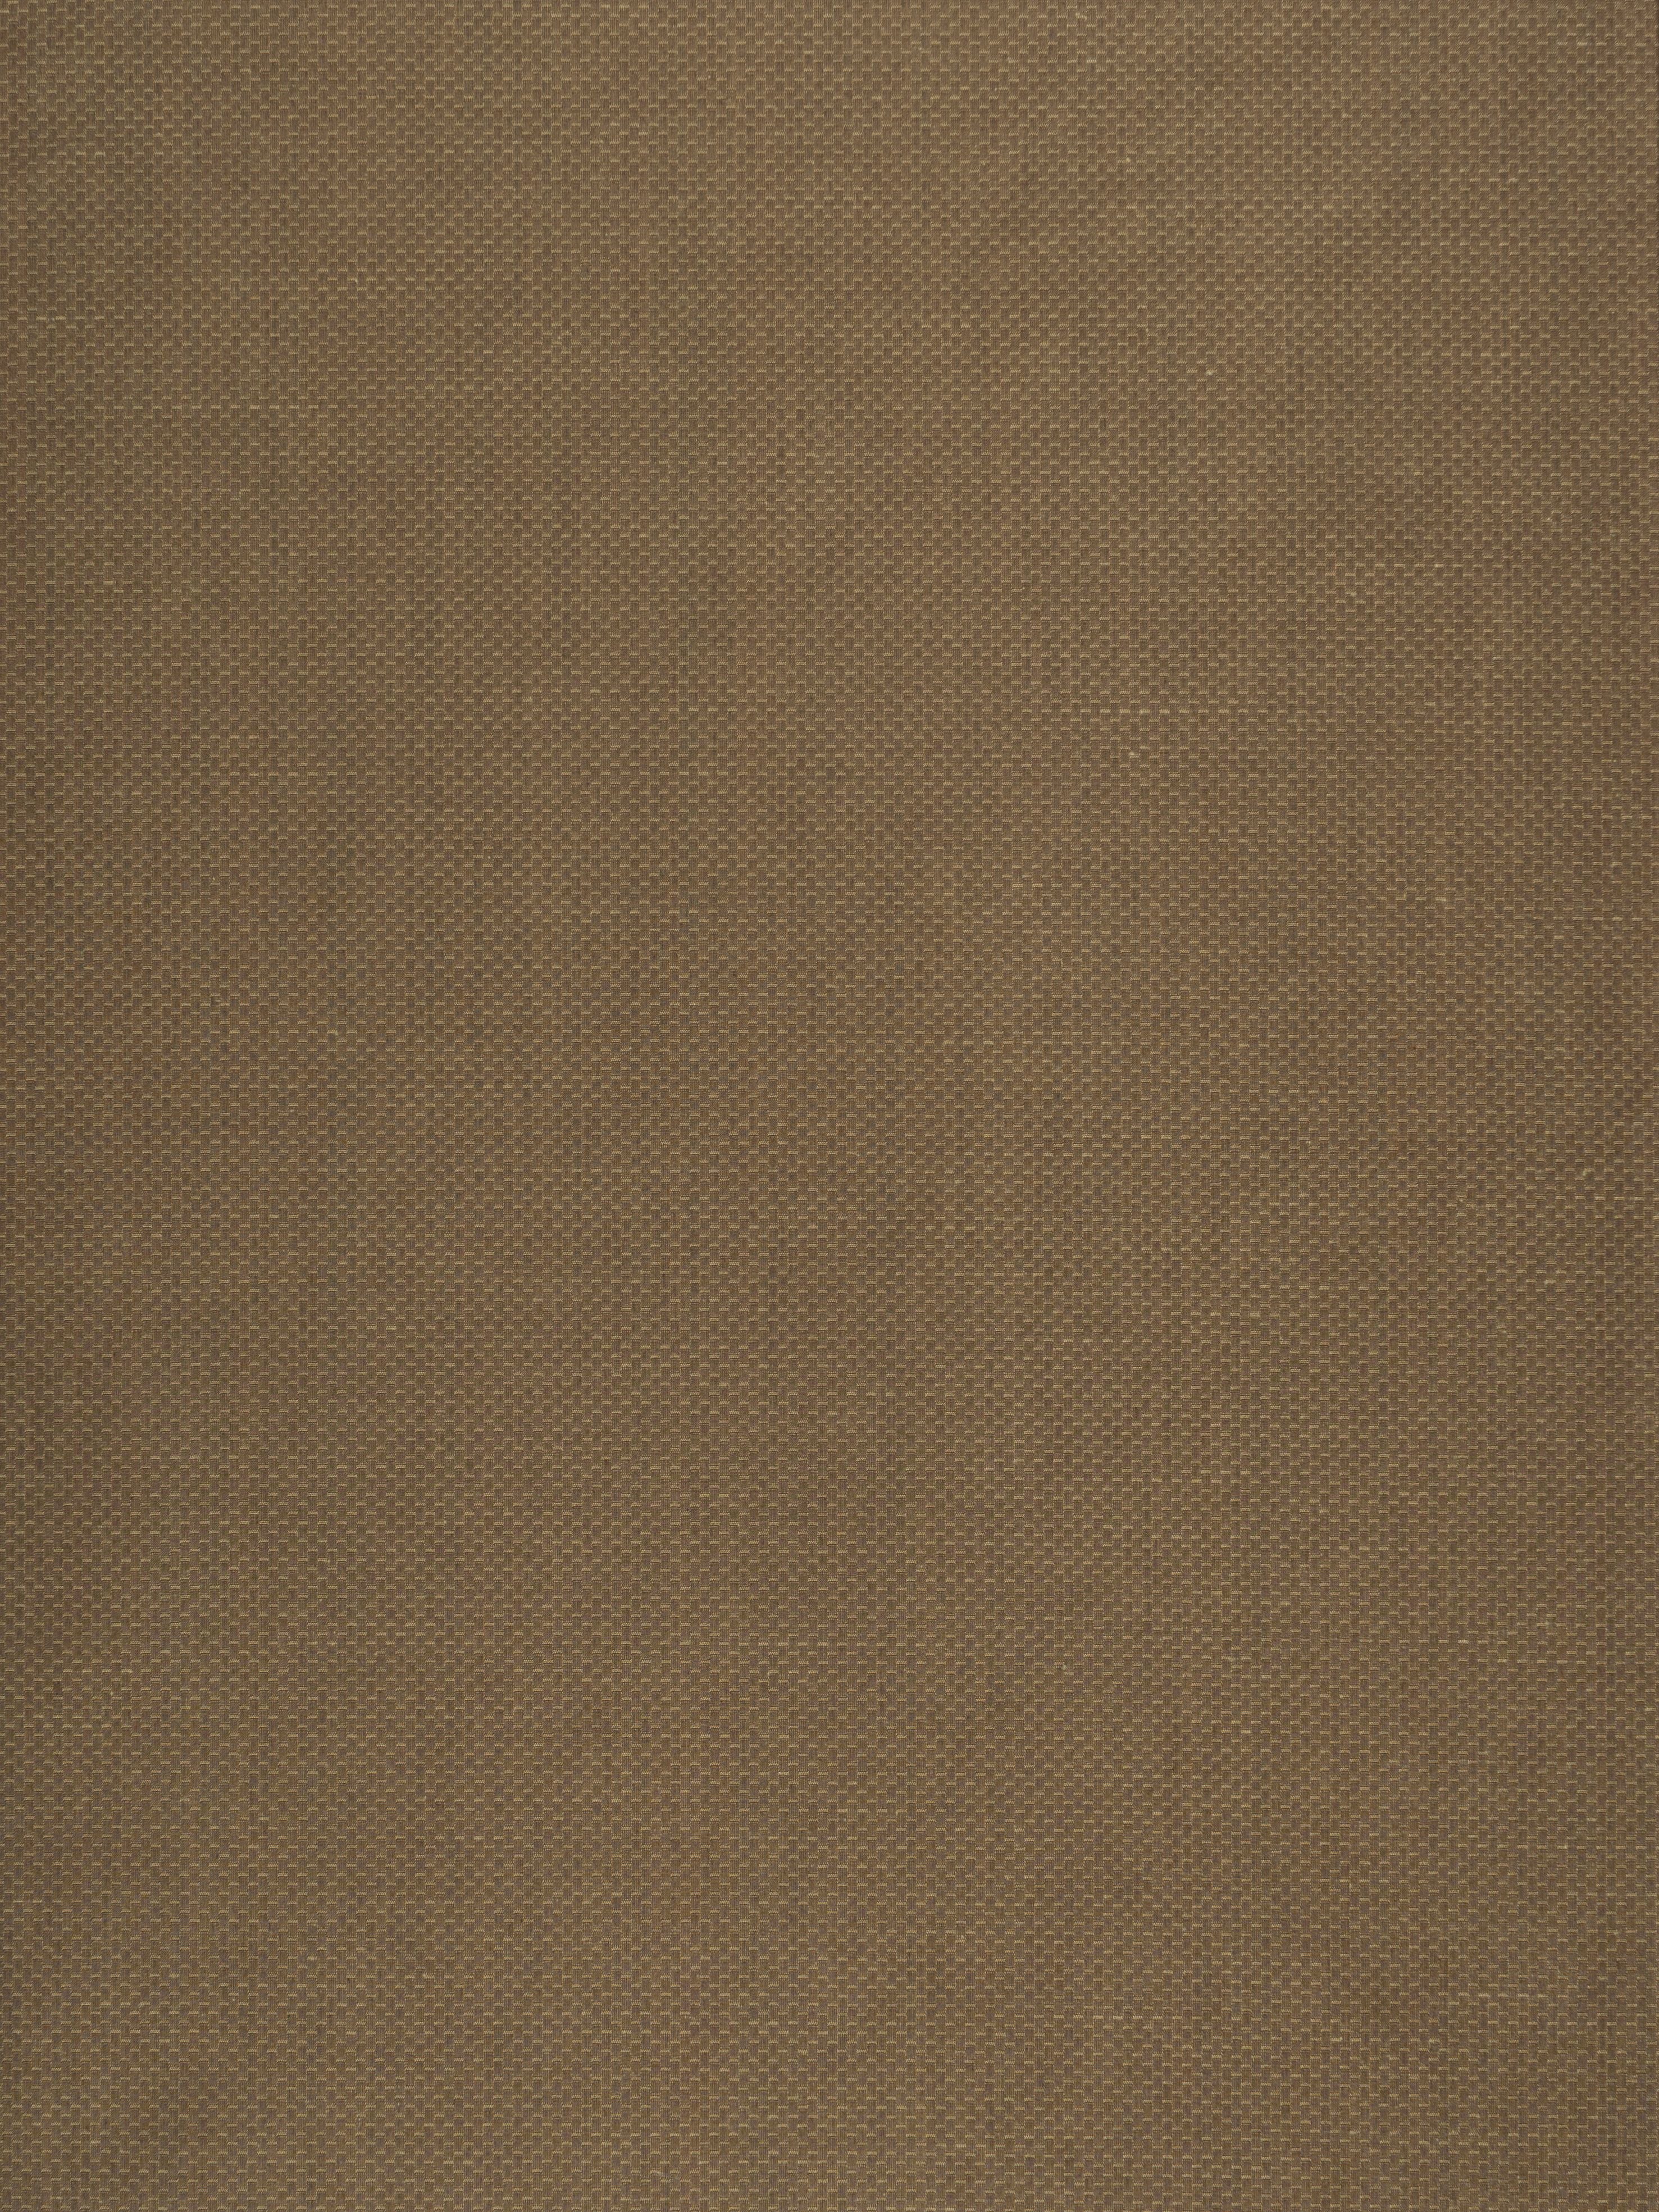 Syncopated Strie fabric in brown color - pattern number M0 00031539 - by Scalamandre in the Old World Weavers collection